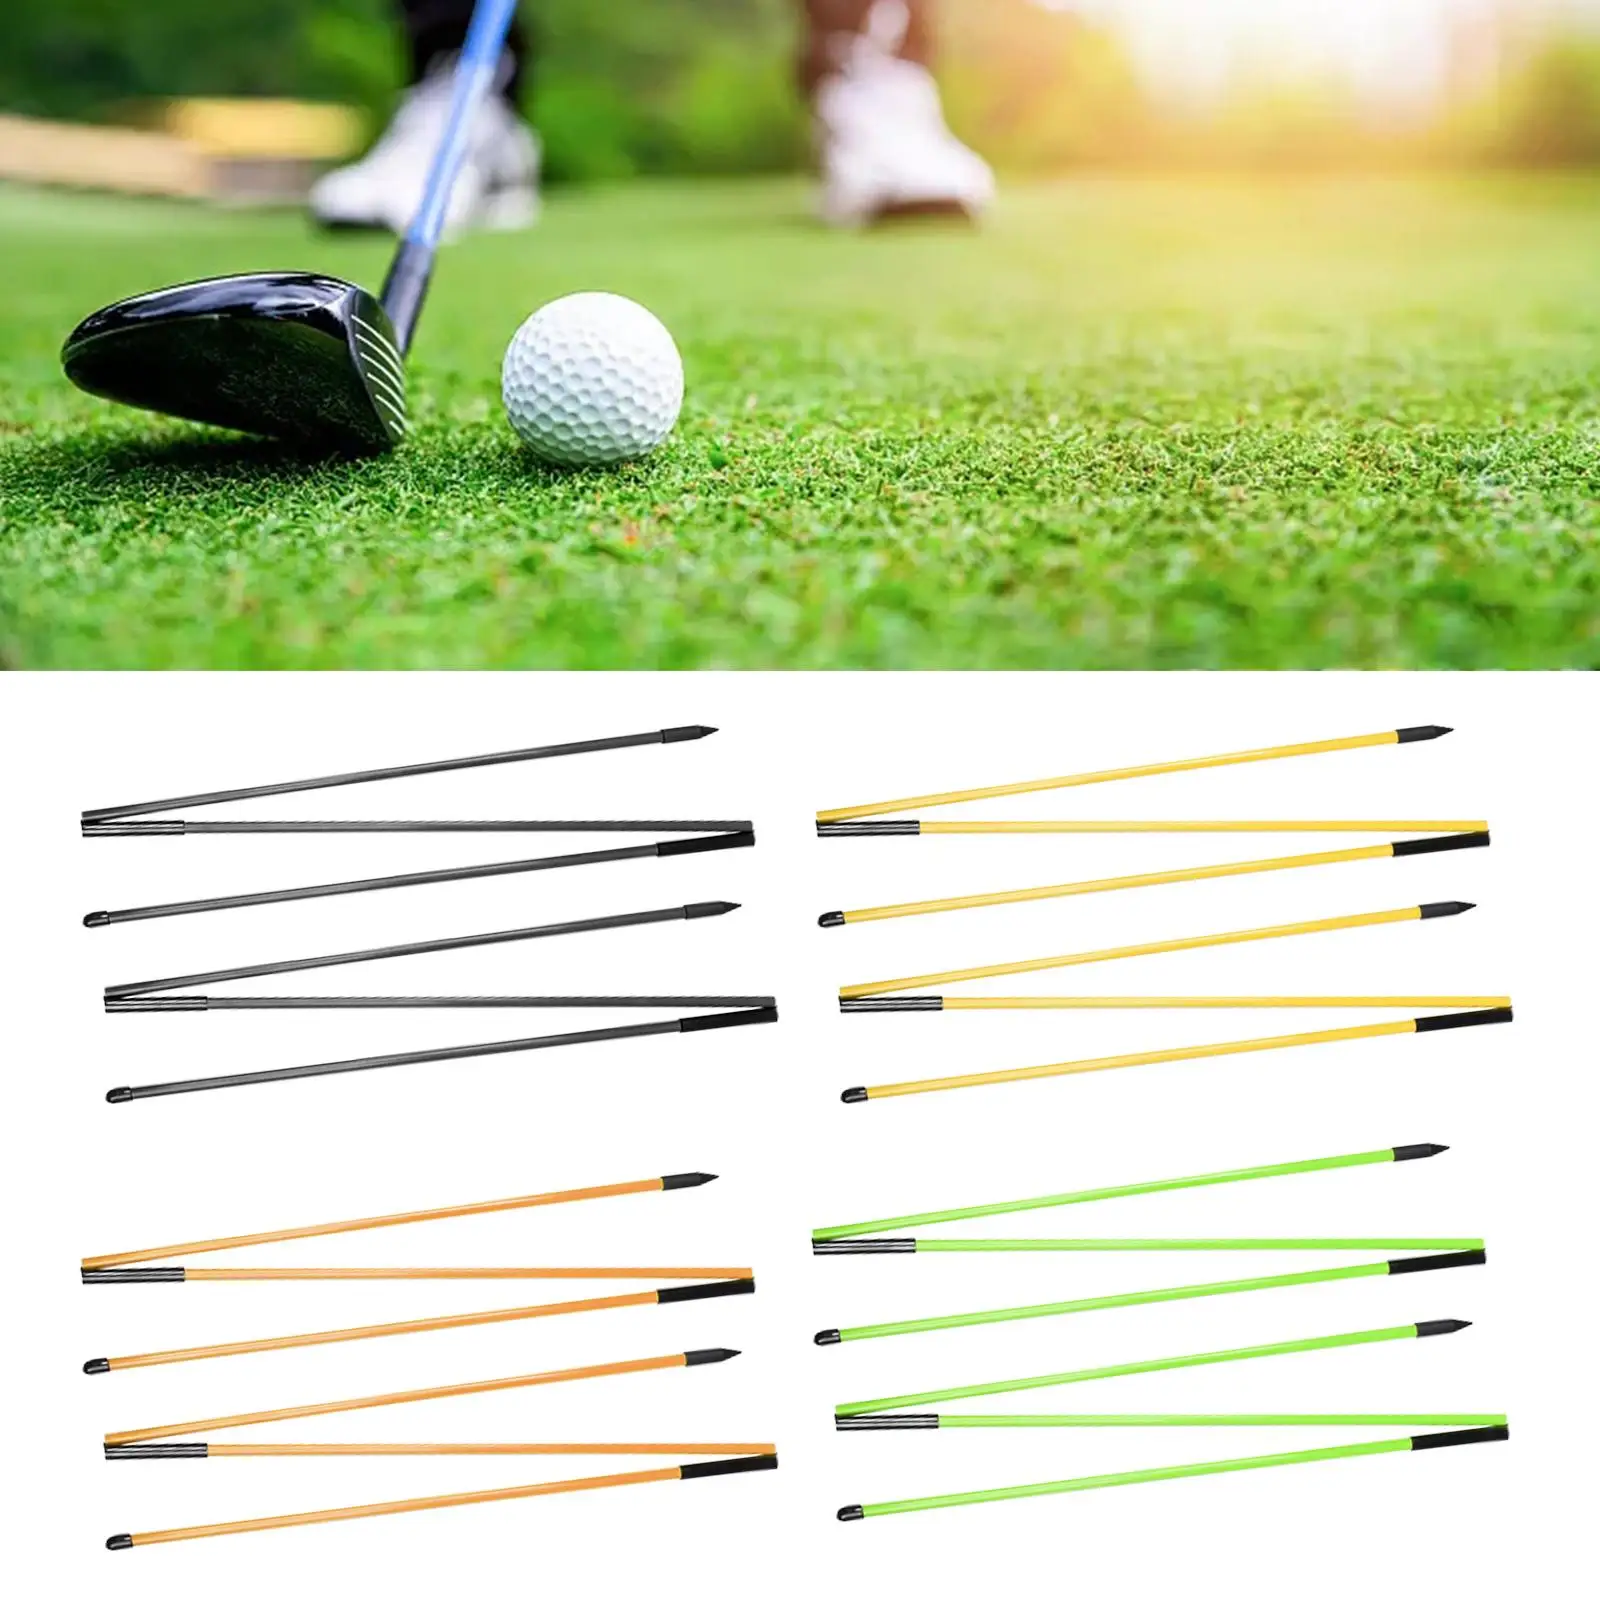 2Pcs Golf Alignment Sticks Training Aid Golf Swing Trainer Portable Collapsible Golf Training Equipment for Full Swing Practice